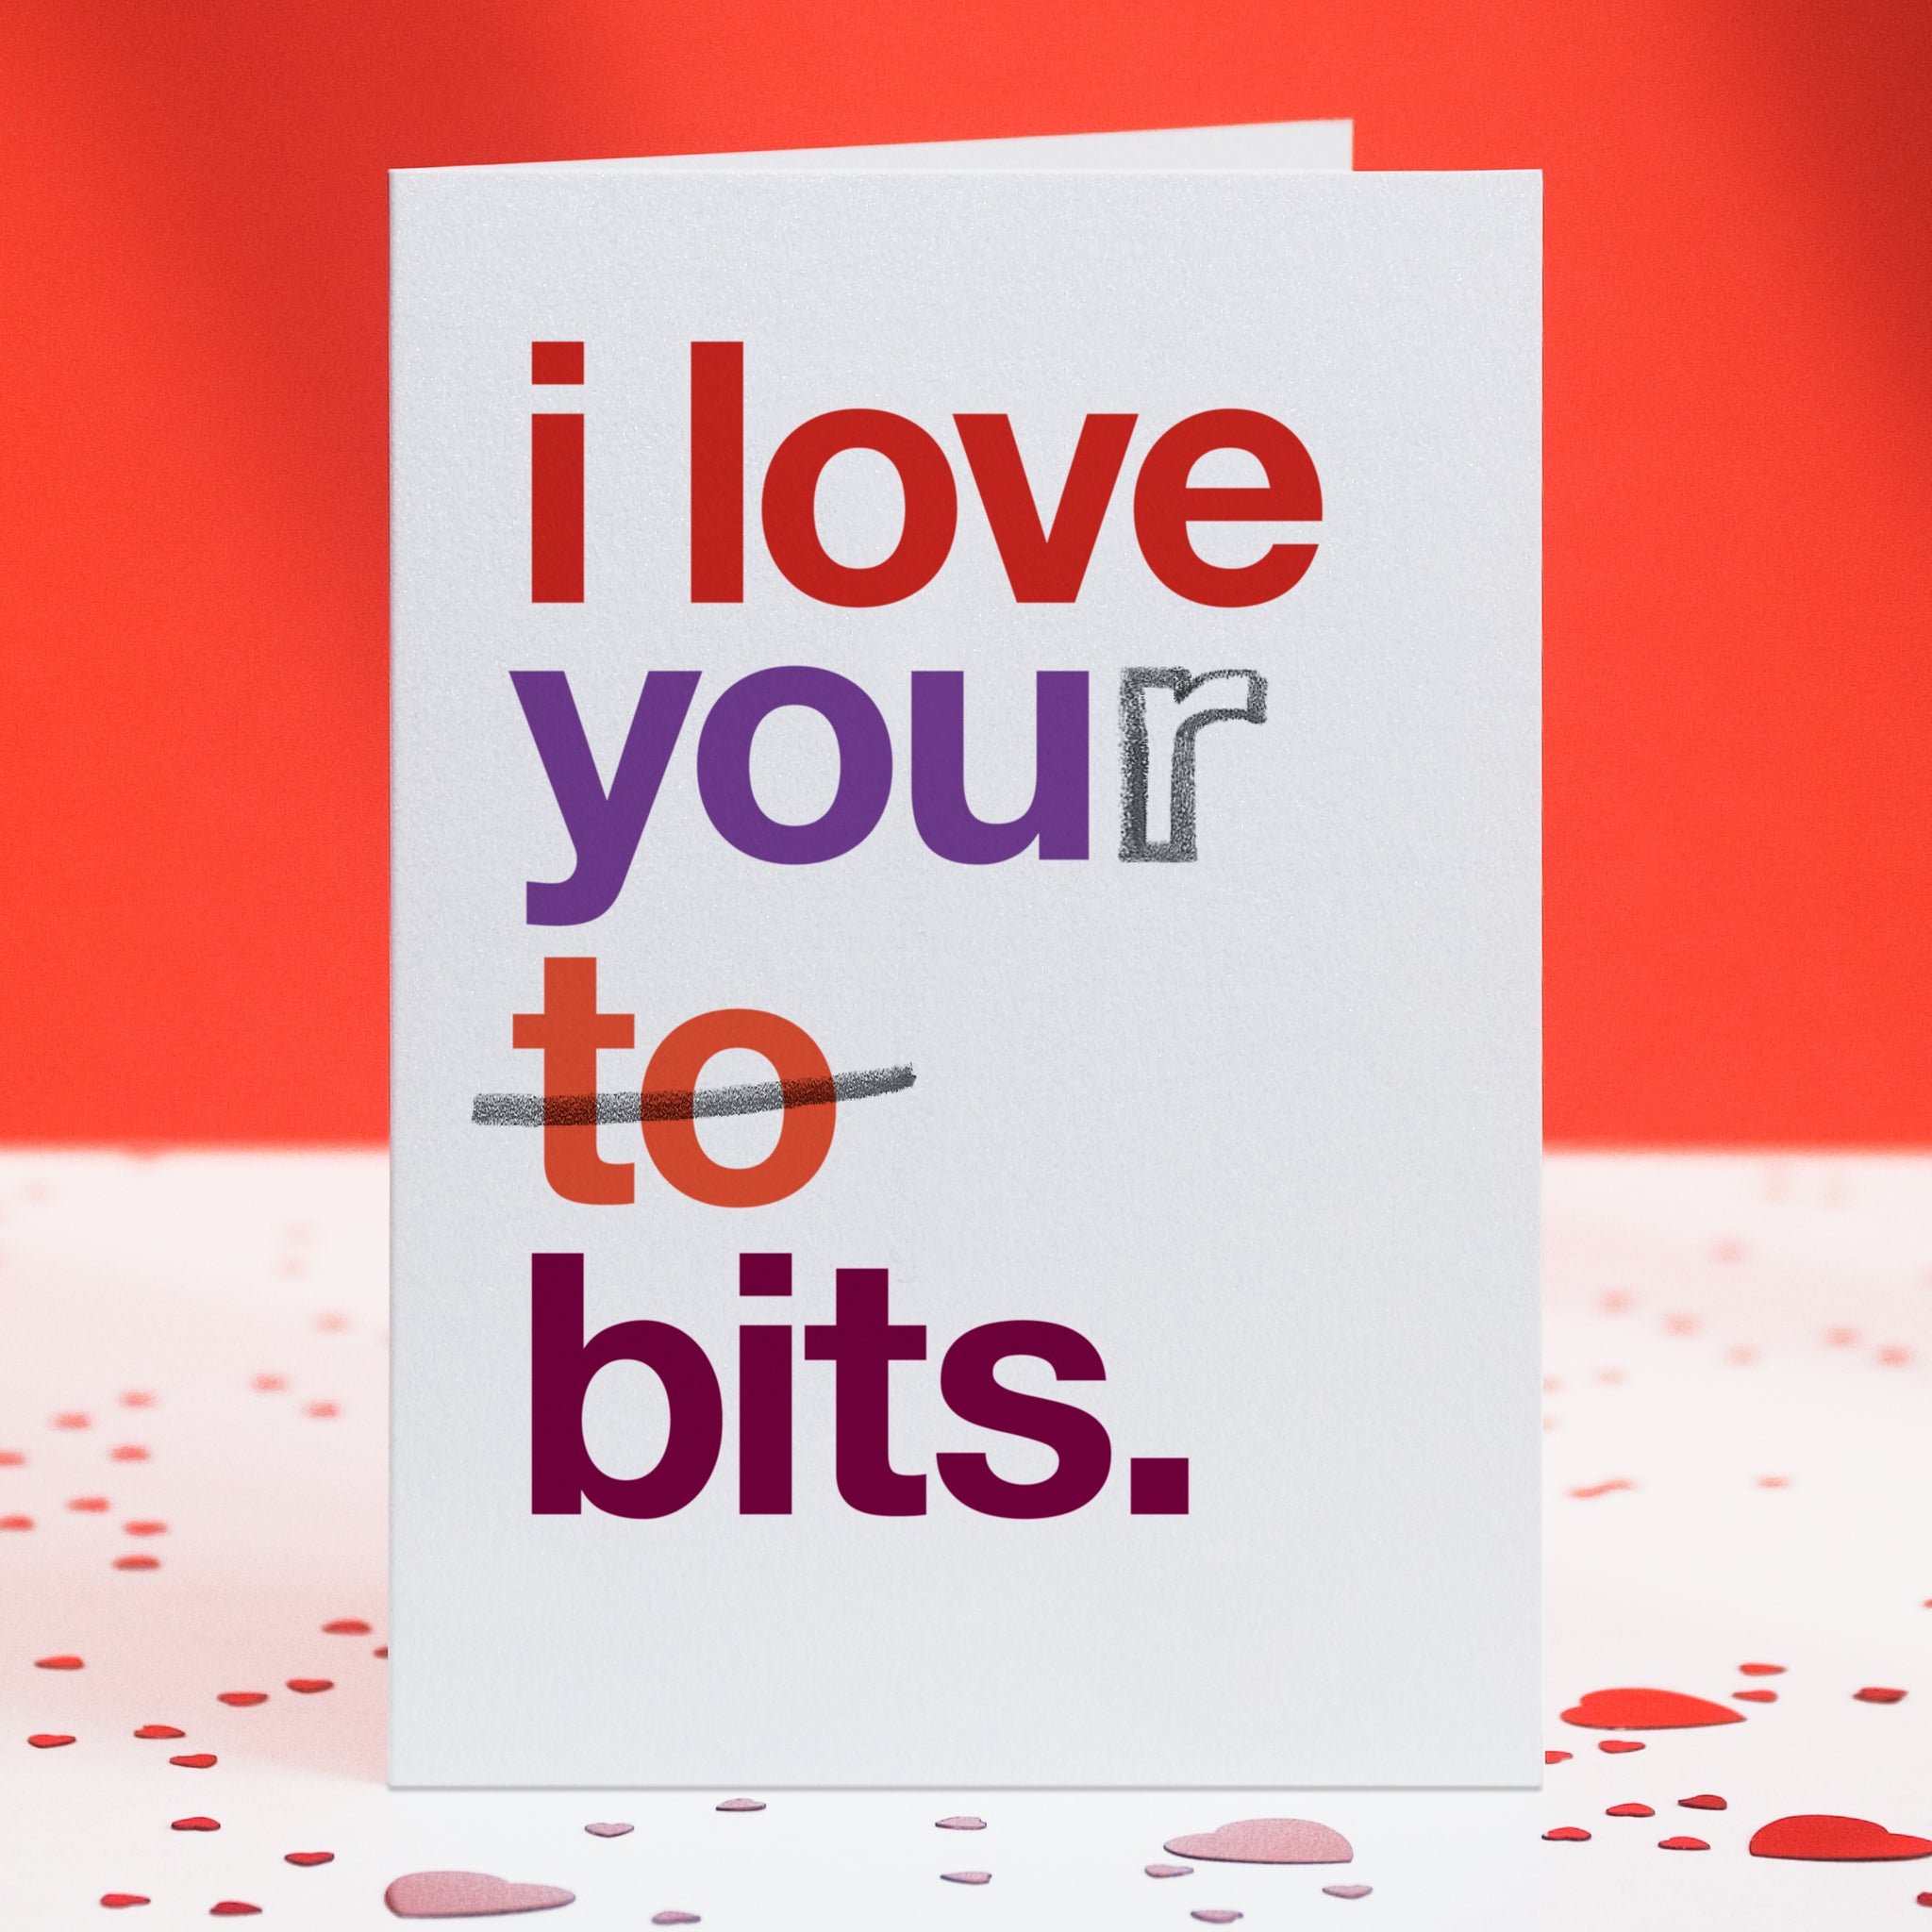 A funny greetings card with the phrase 'i love you to bits' altered to say 'i love your bits'.